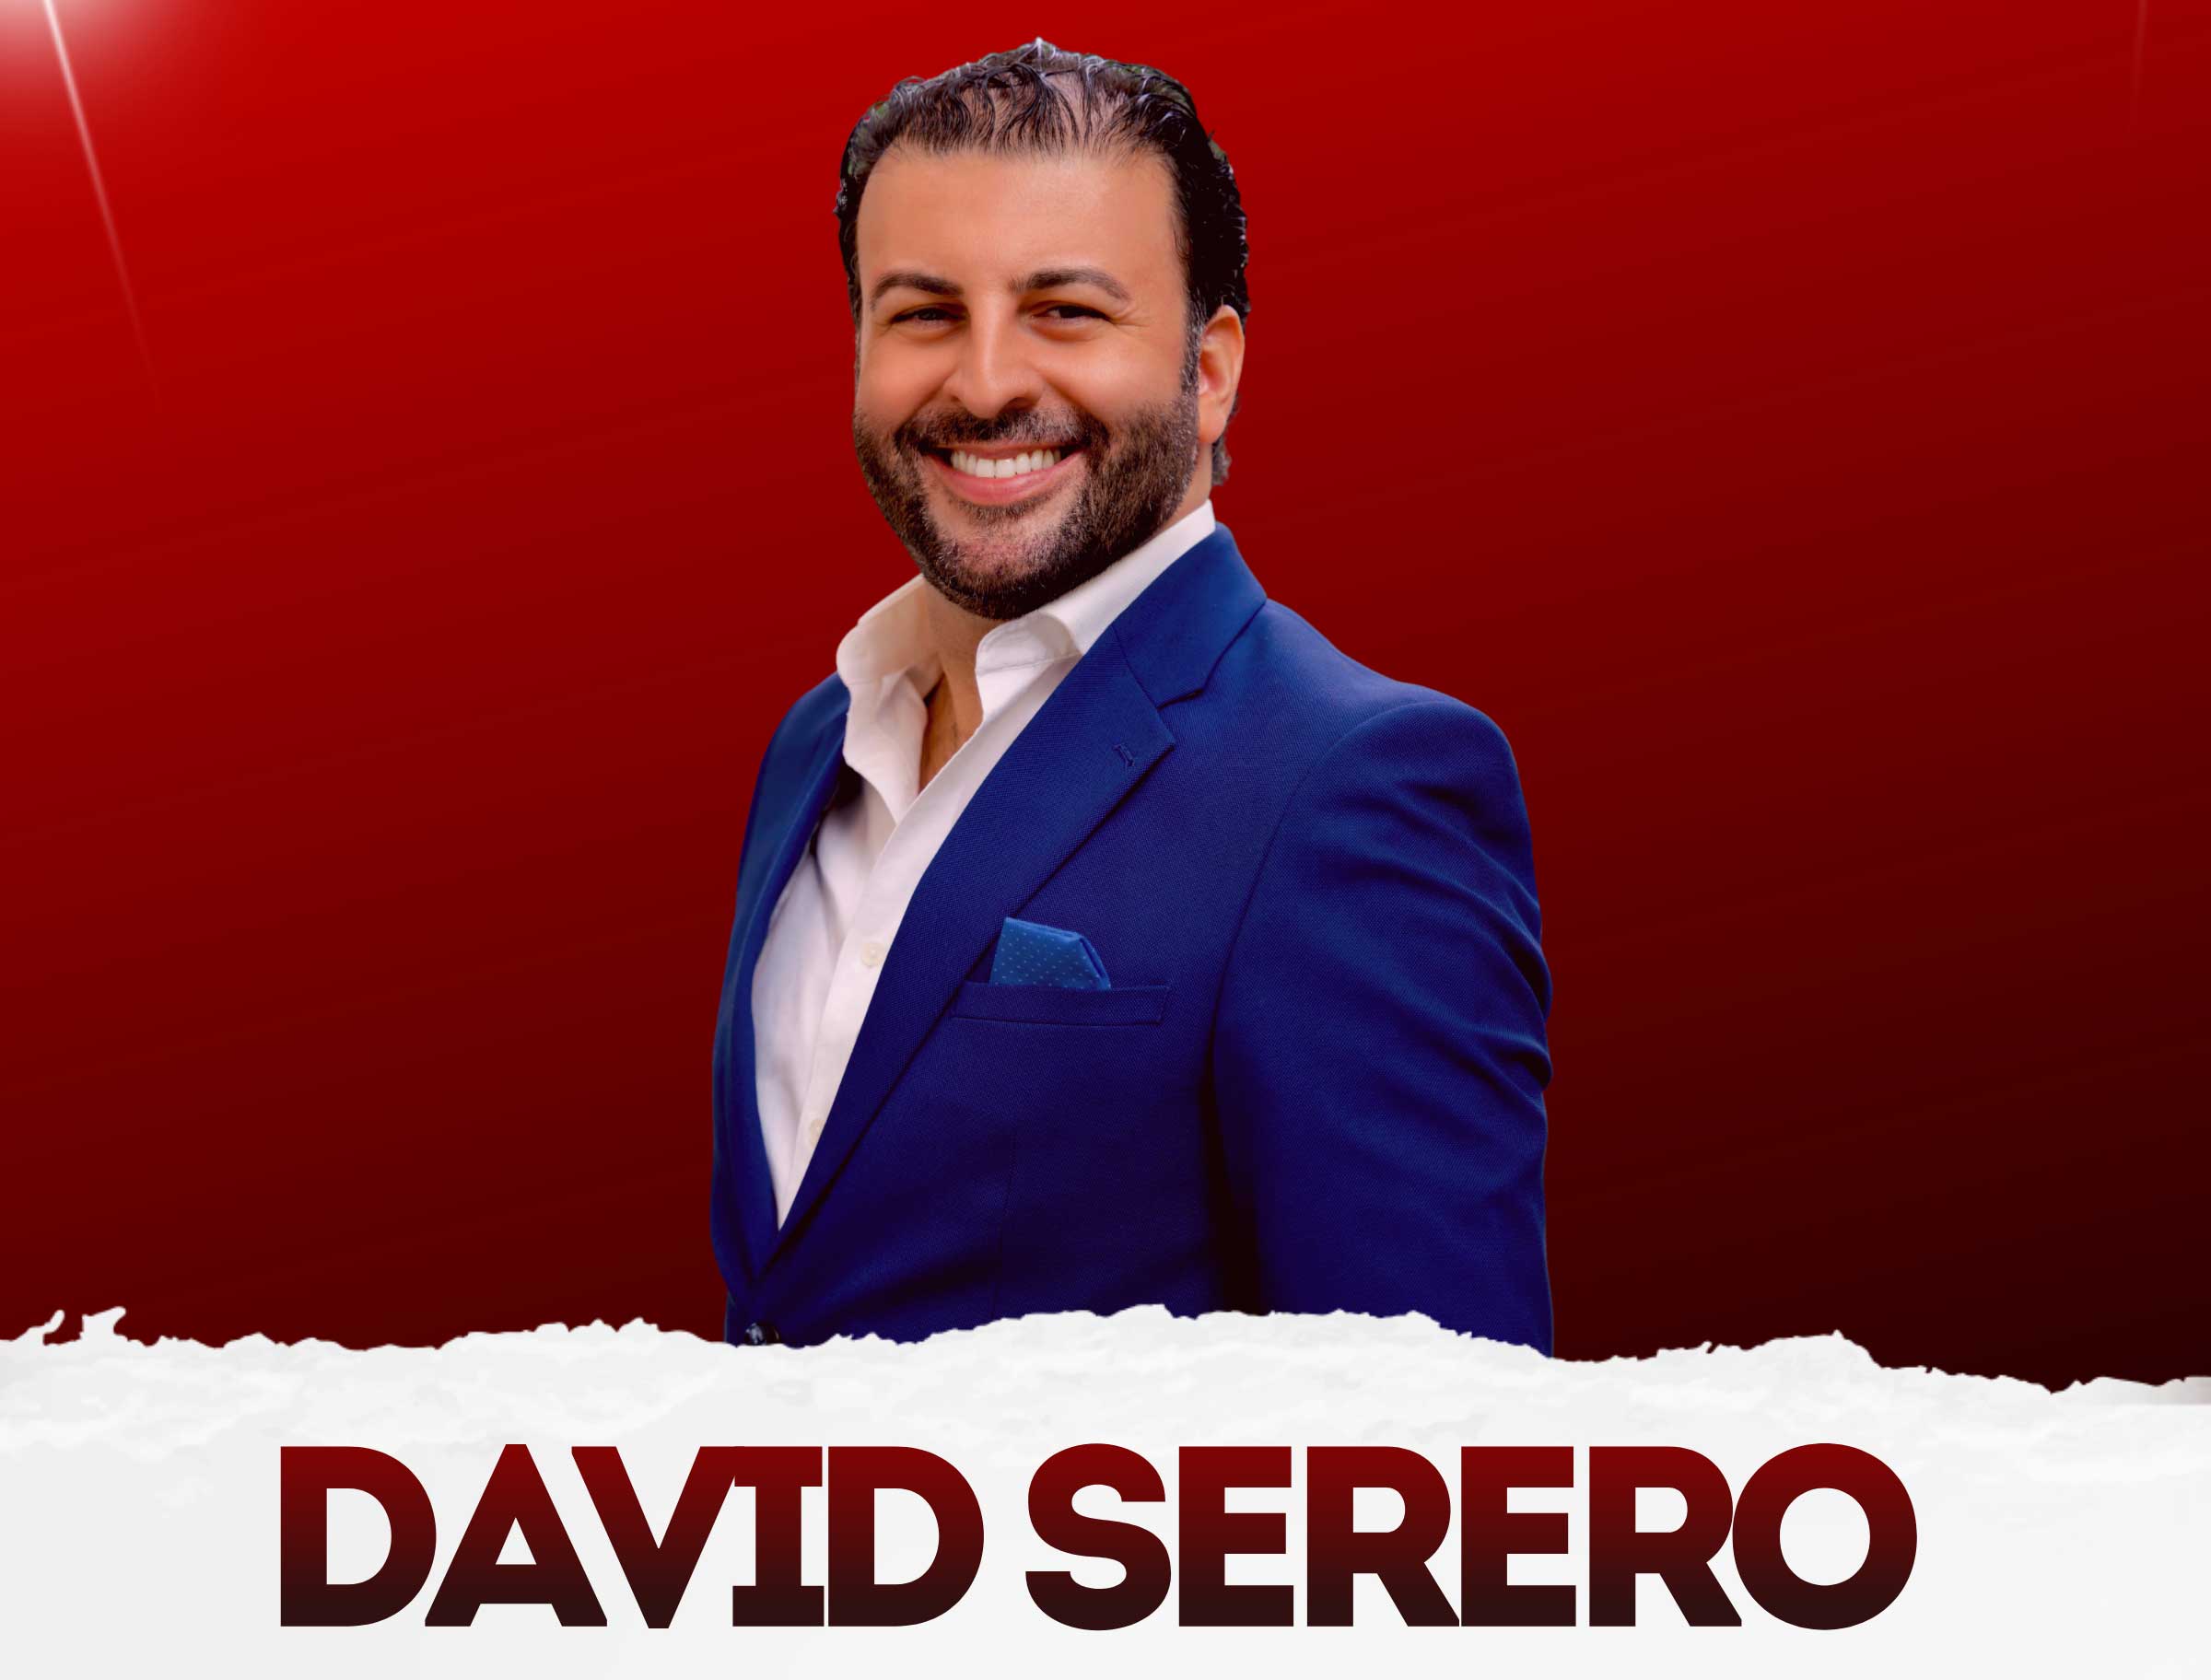 Concert of David Serero at the Alliance Francaise of Dubai - Coming Soon in UAE